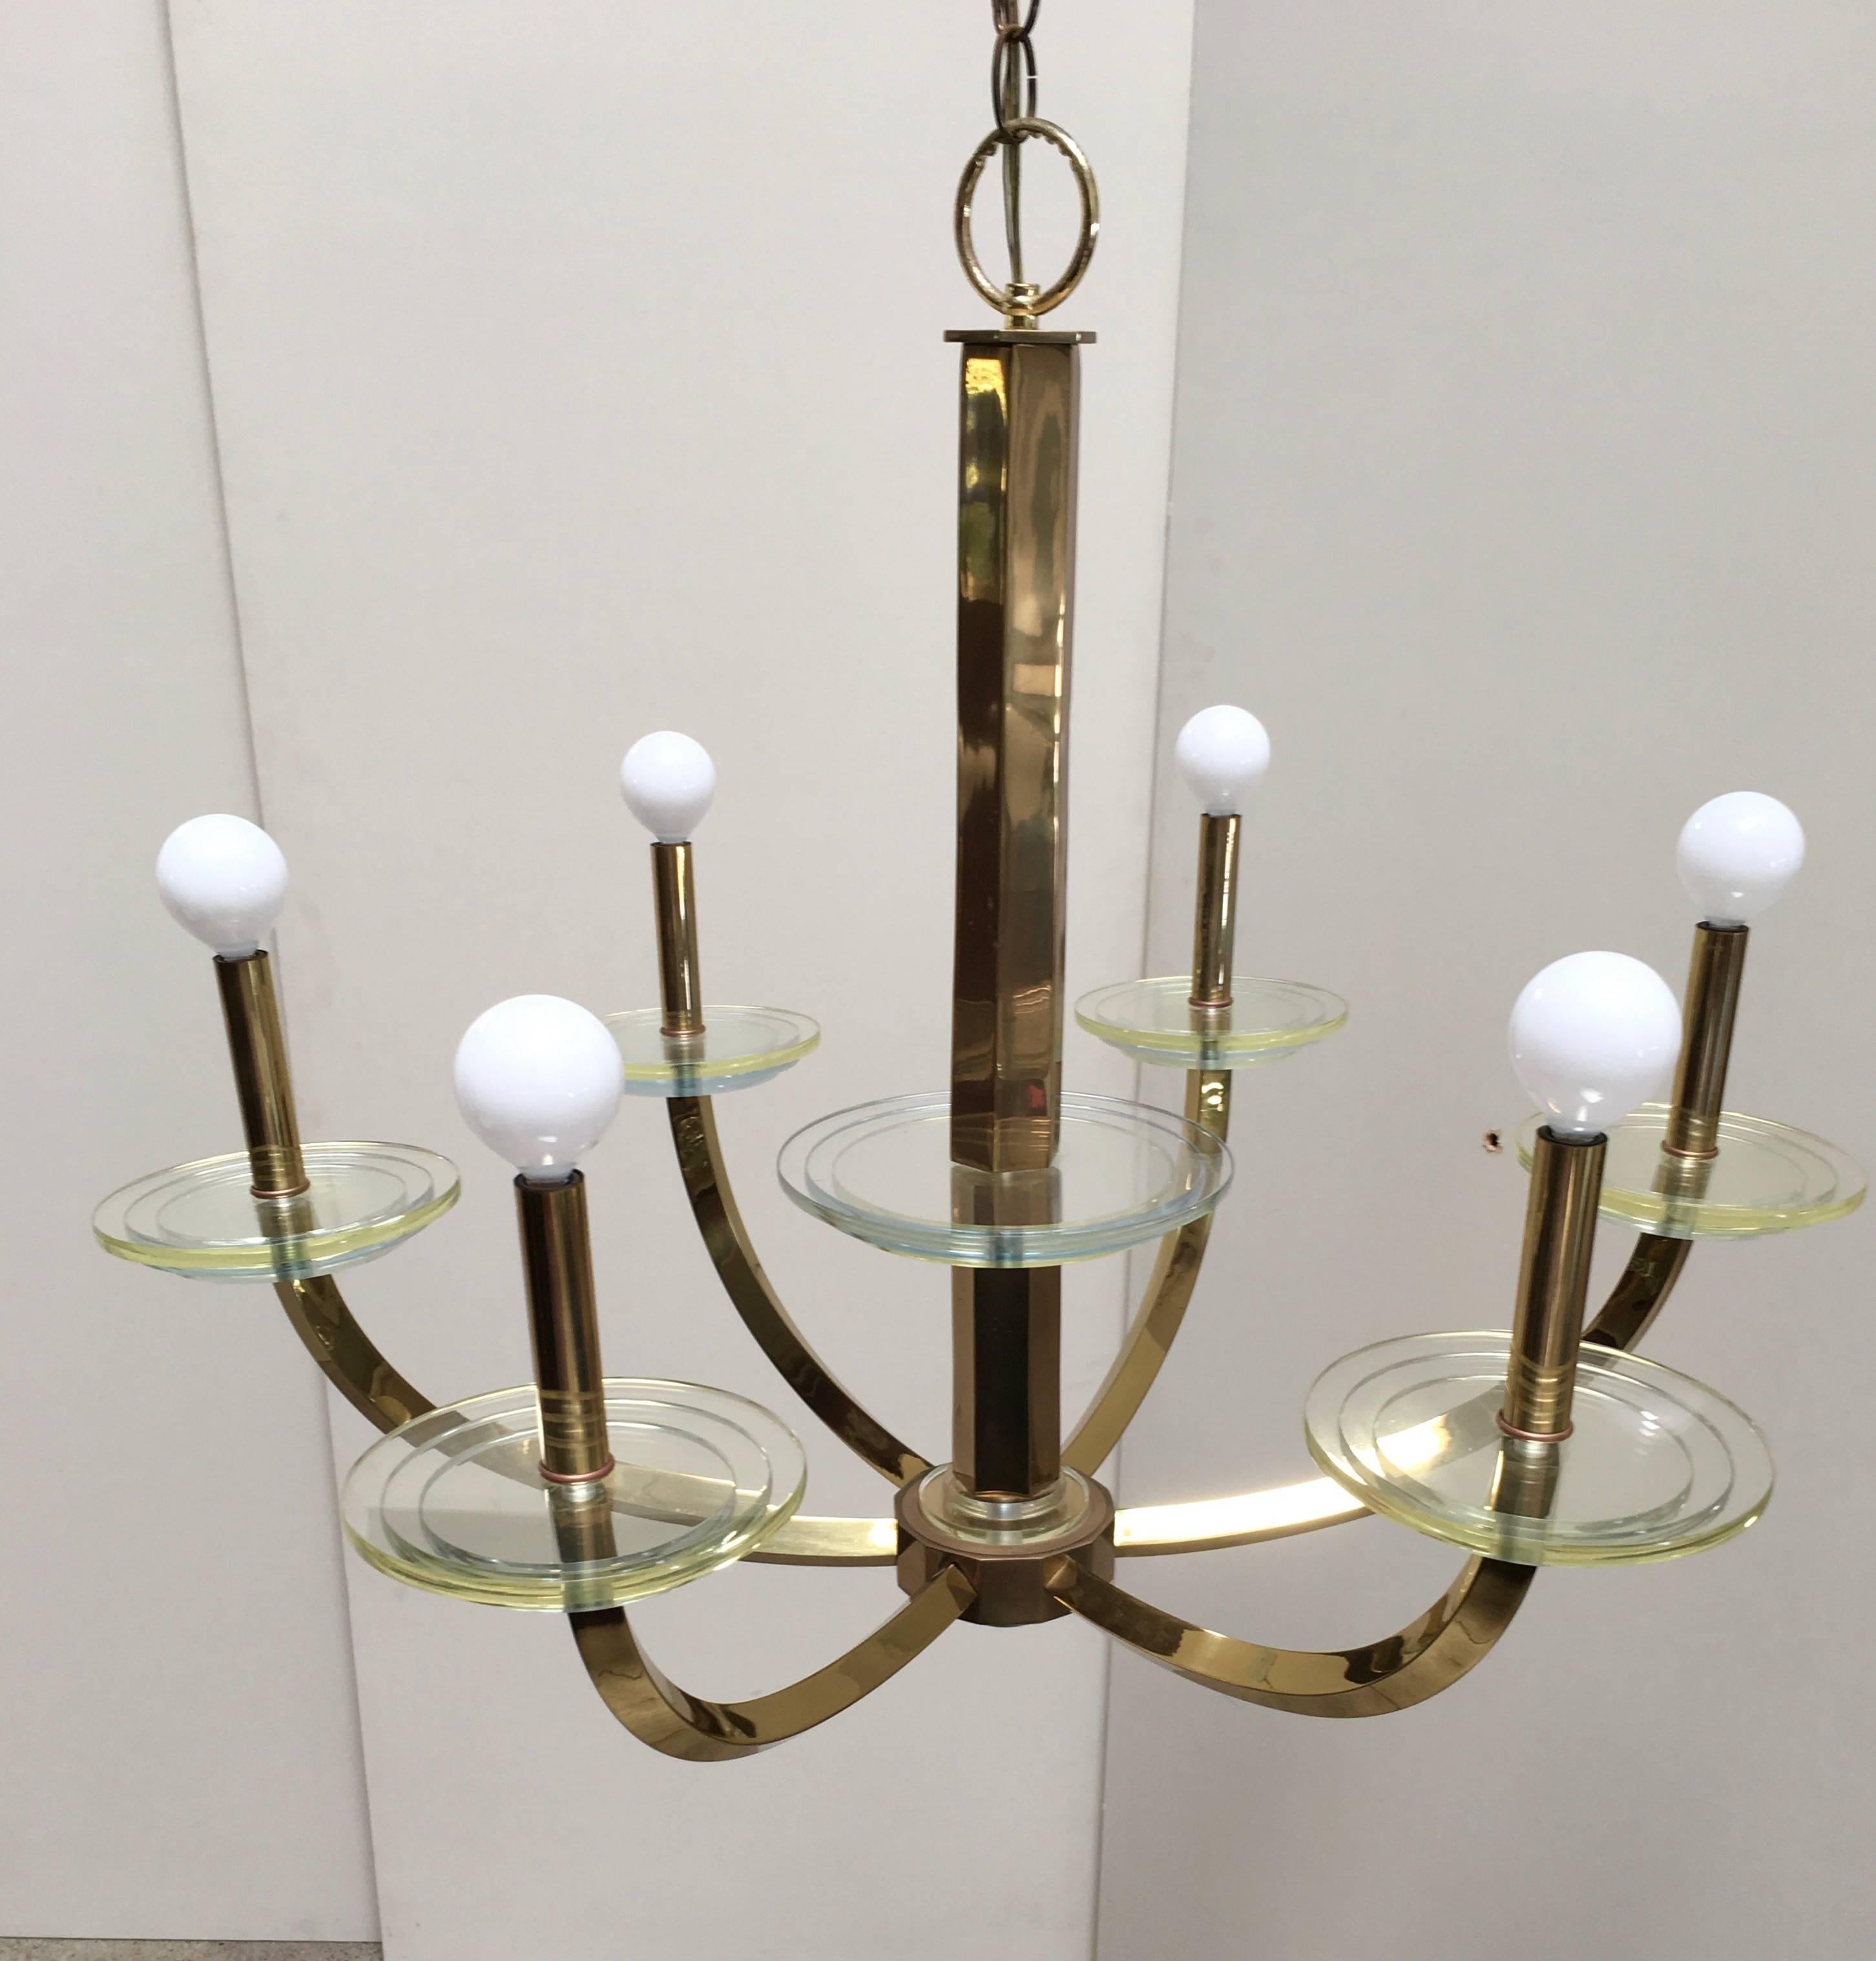 Parzinger style chandelier with original warm Patina on the brass.